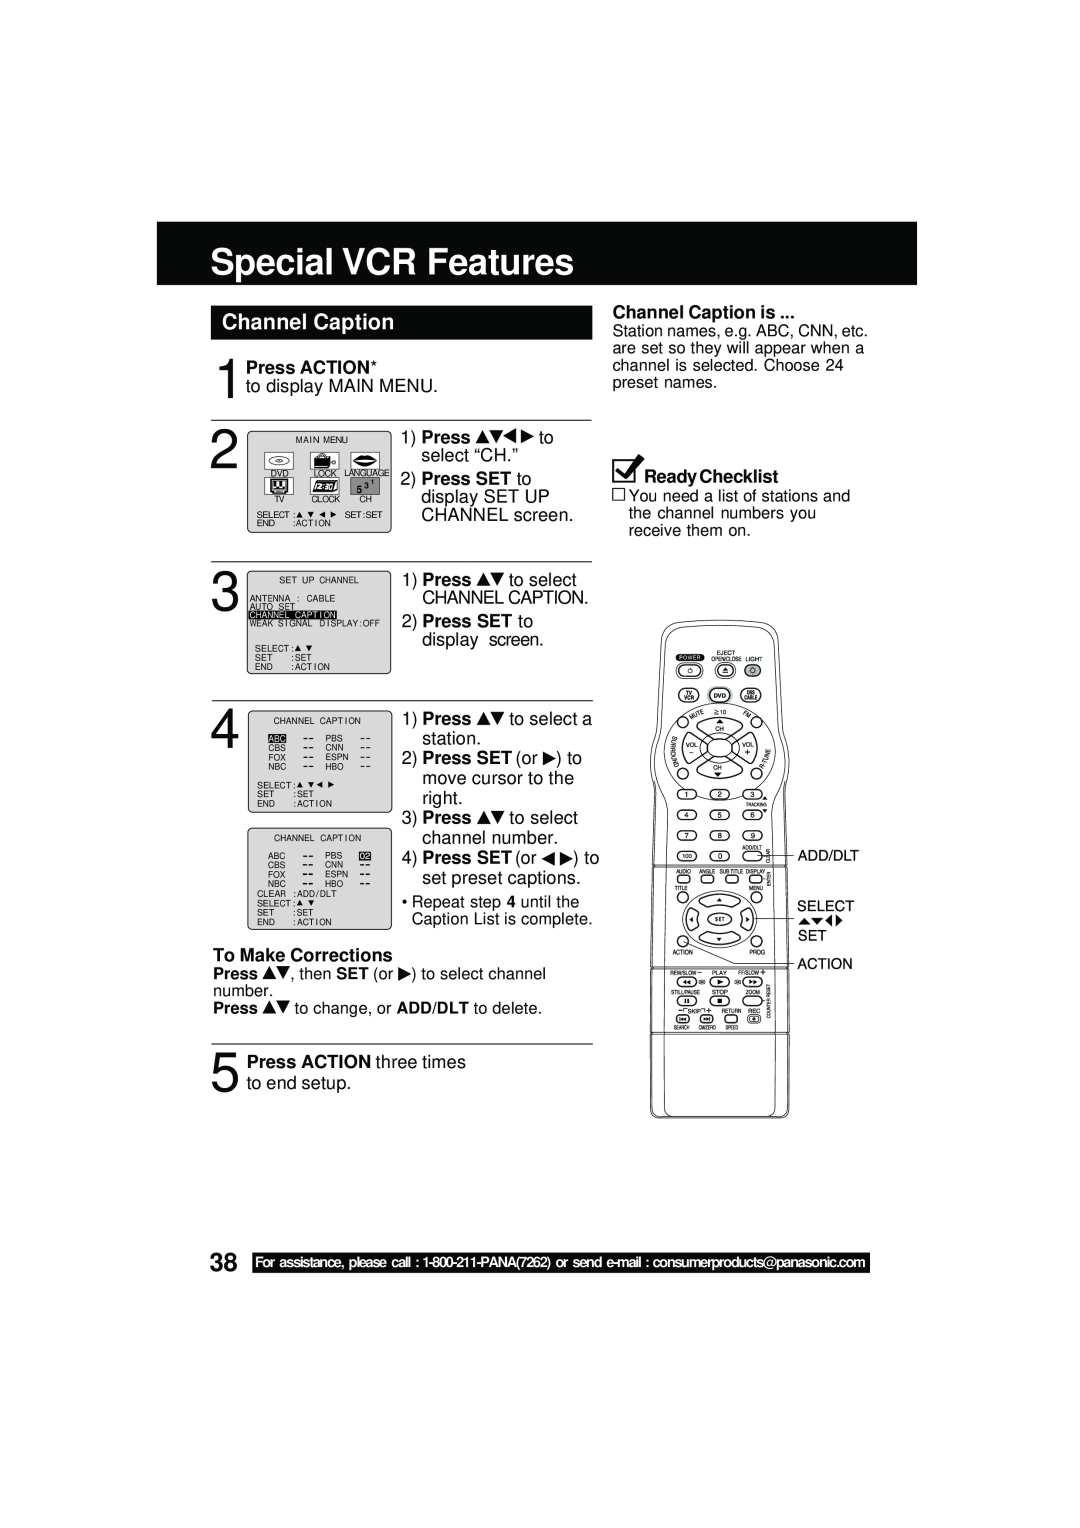 Panasonic PV DM2092 manual Special VCR Features, Channel Caption is, Press SET or, To Make Corrections, Press ACTION 